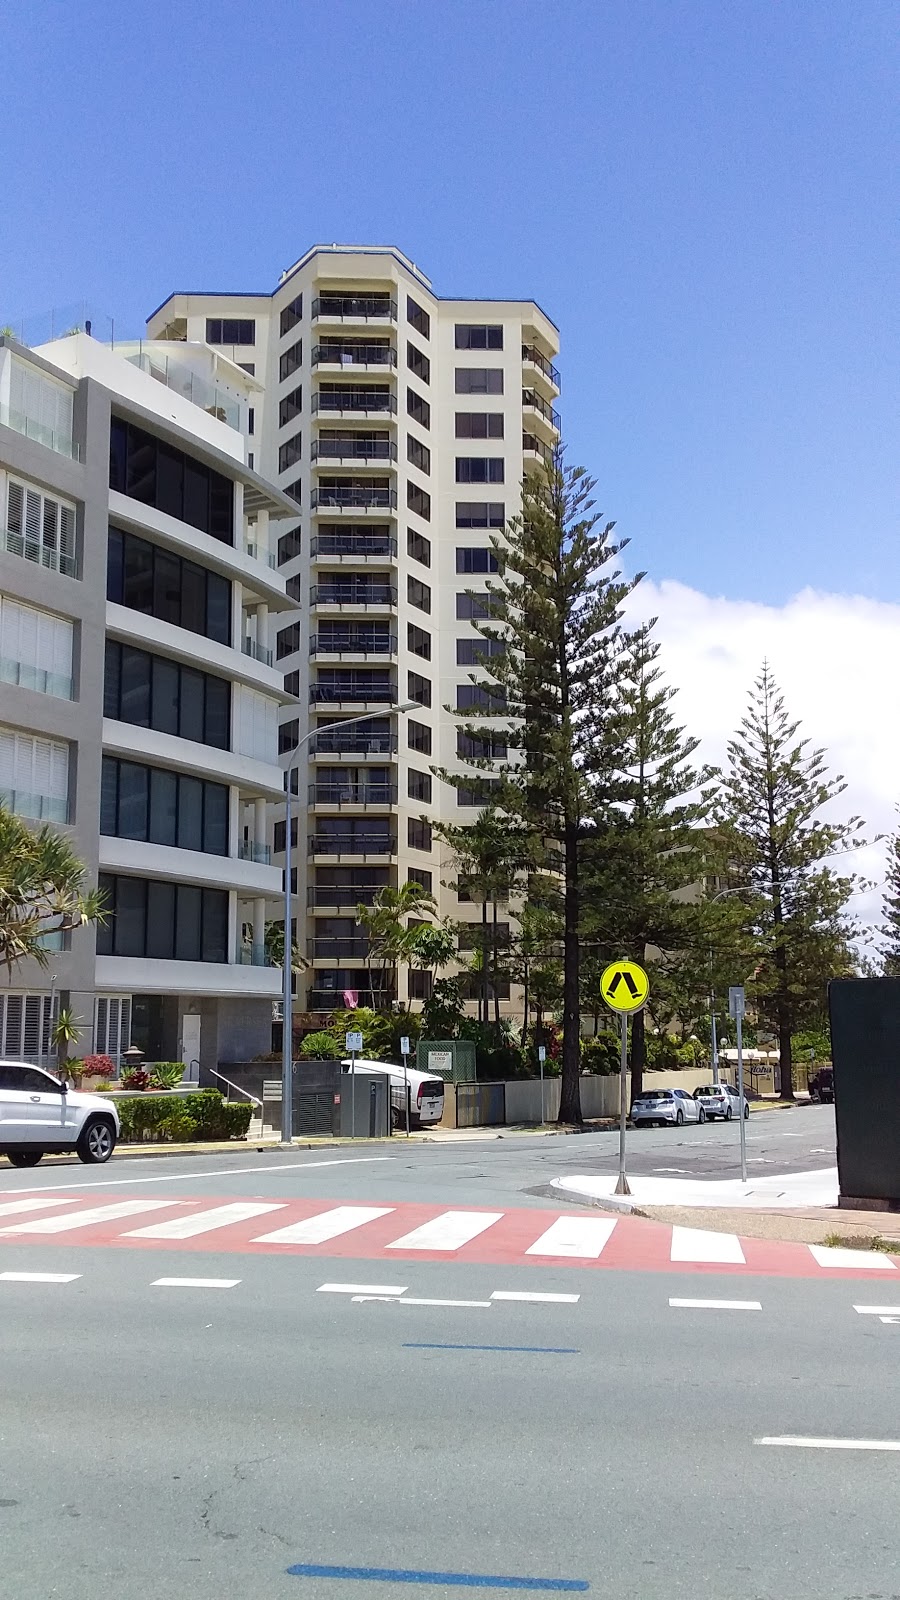 Erikas Holiday Apartments | lodging | 8 Trickett St, Surfers Paradise QLD 4217, Australia | 0432077721 OR +61 432 077 721